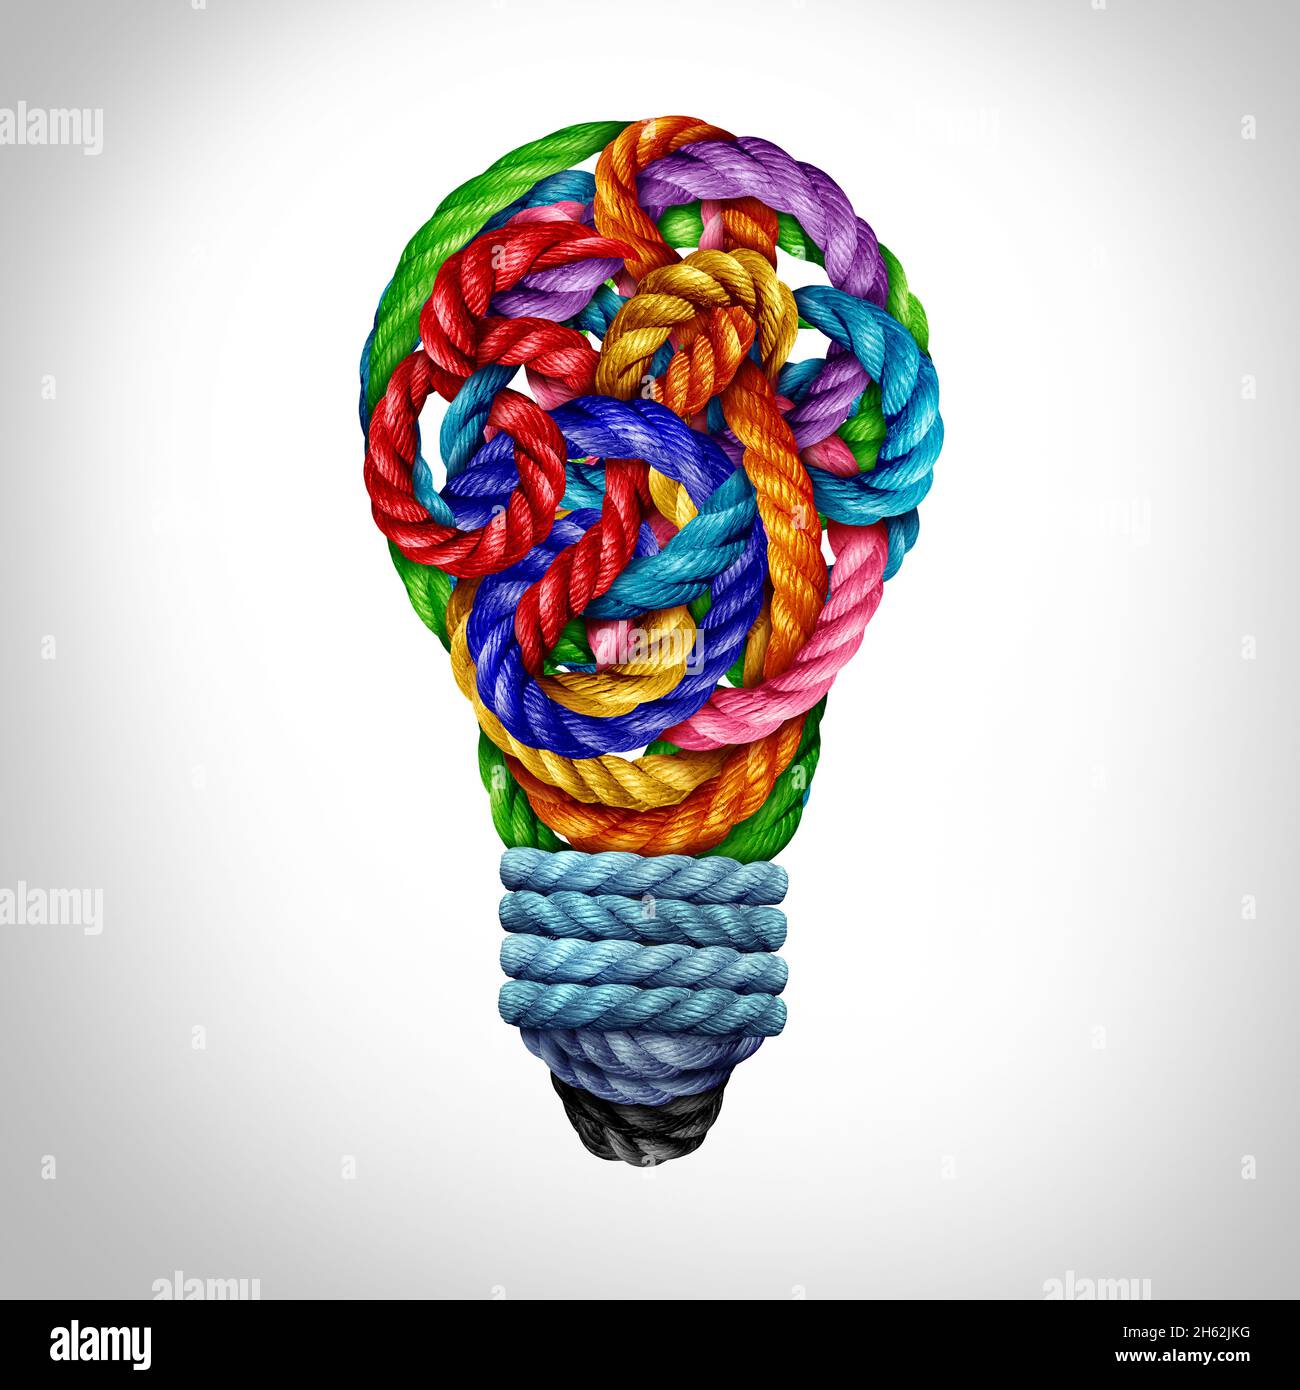 Creative Idea symbol and strong ideas concept as a creativity light bulb made of diverse ropes representing innovative thinking. Stock Photo